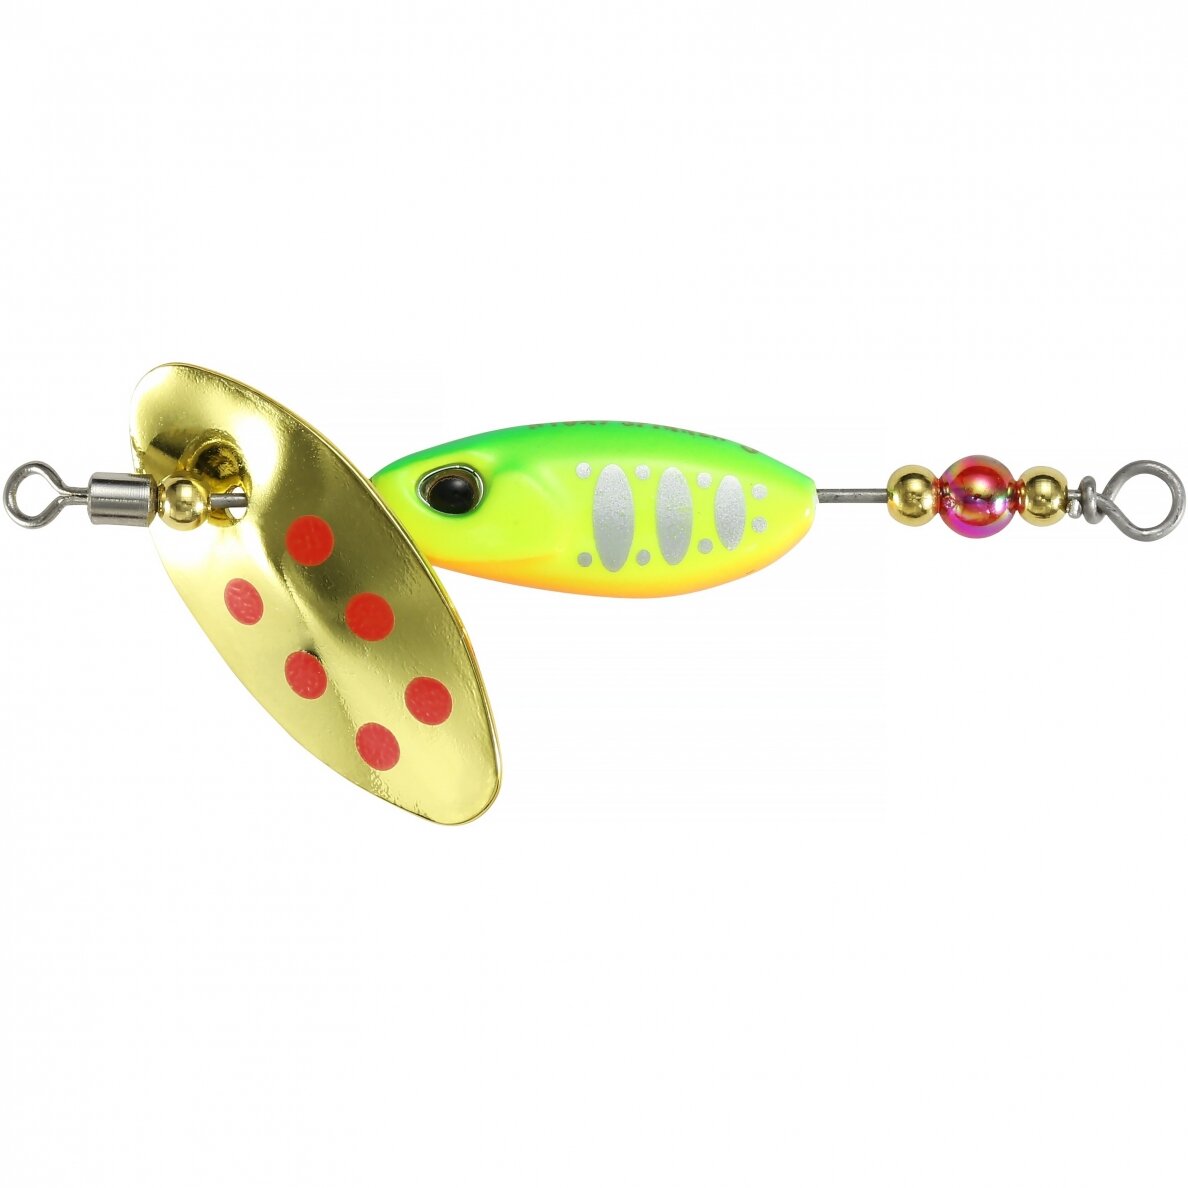 Smith Niakis 3 g various colors trout spinner